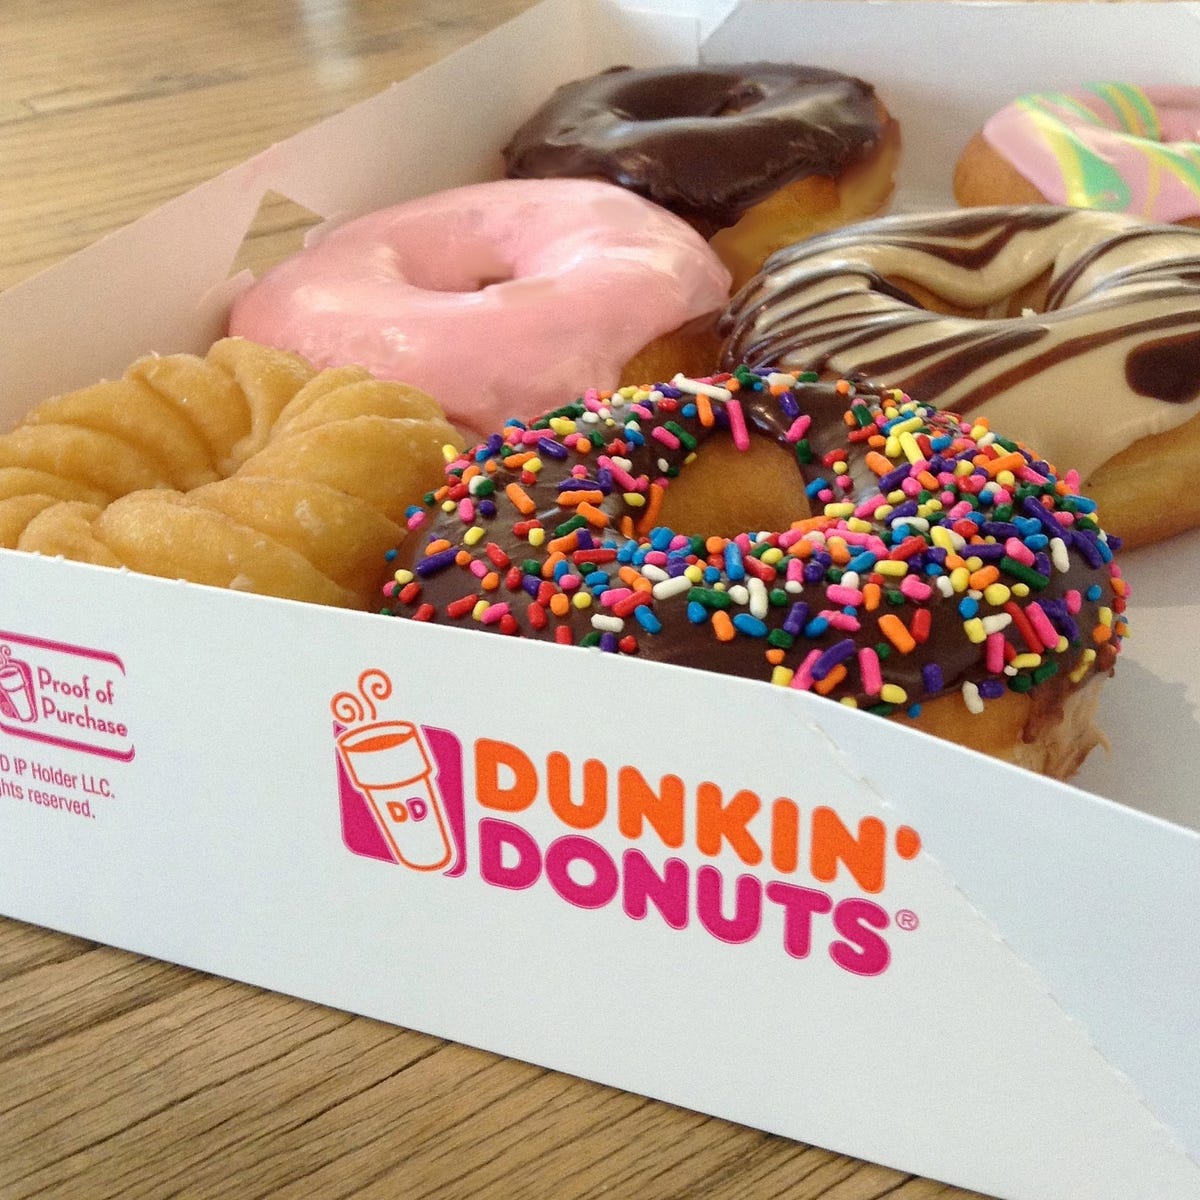 Macros : why Dunkin Donuts is my breakfast of choice.